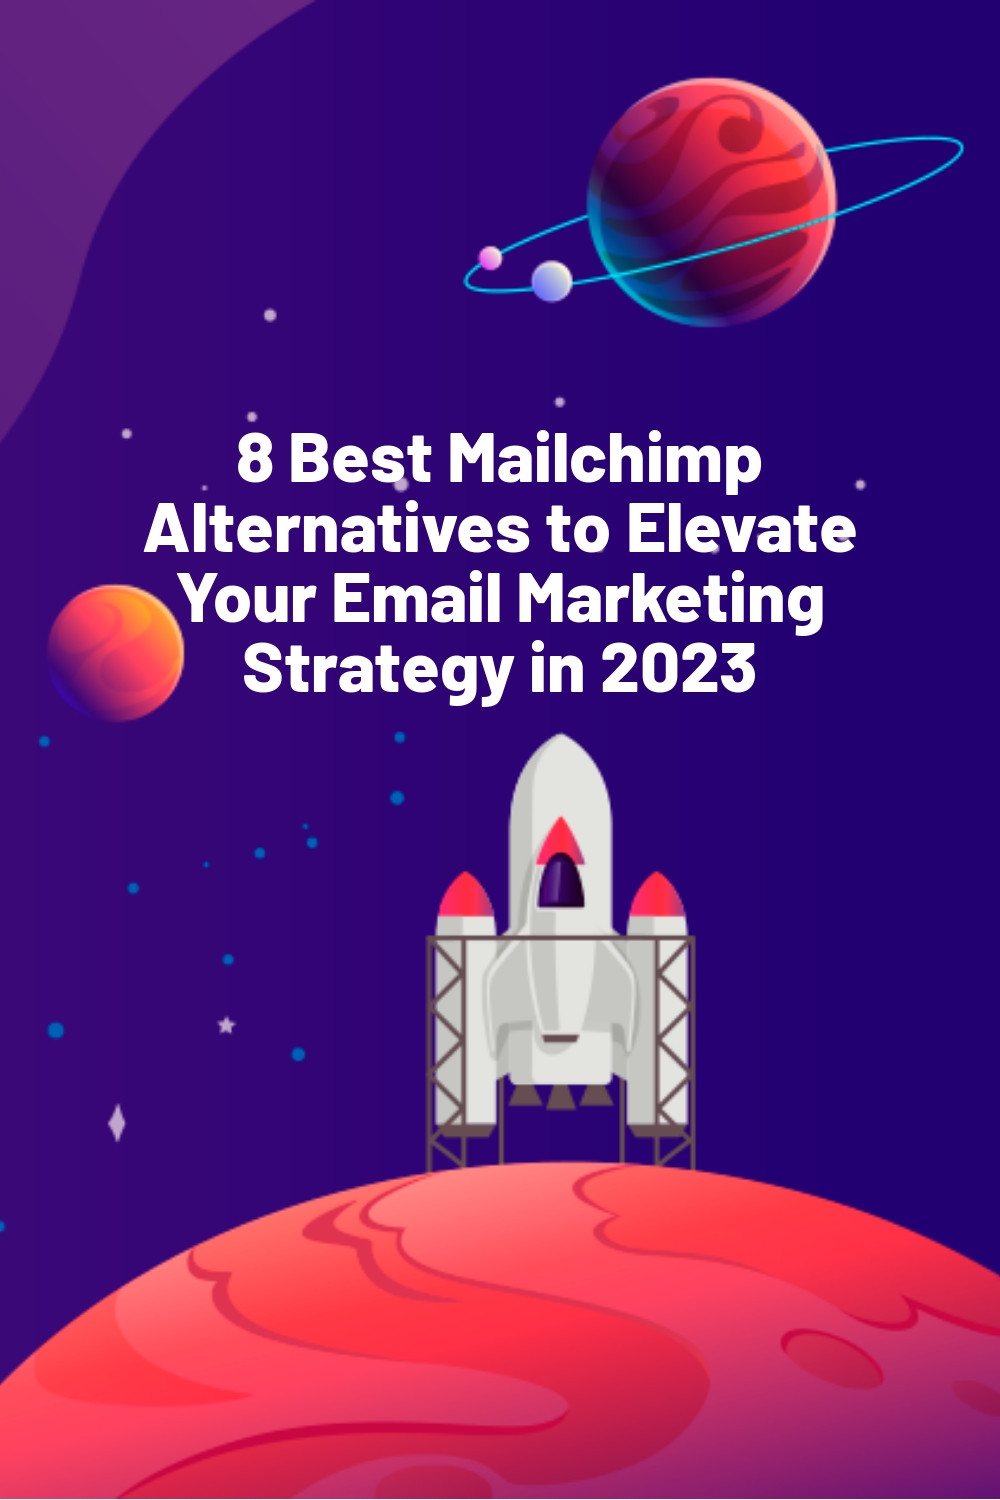 8 Best Mailchimp Alternatives to Elevate Your Email Marketing Strategy in 2023